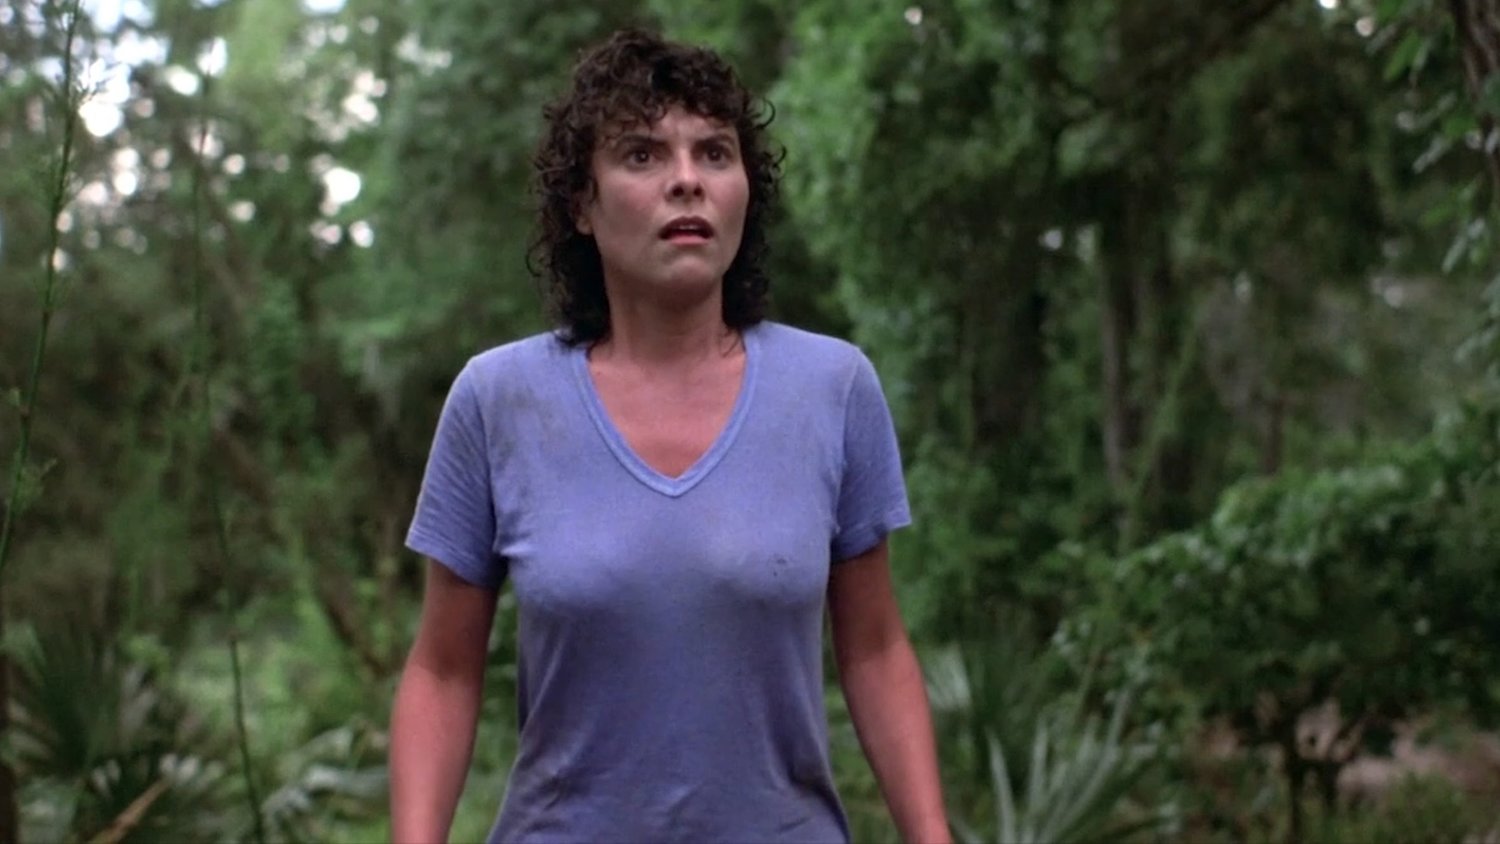 Original SWAMP THING Star Adrienne Barbeau Joins DC's New Series.